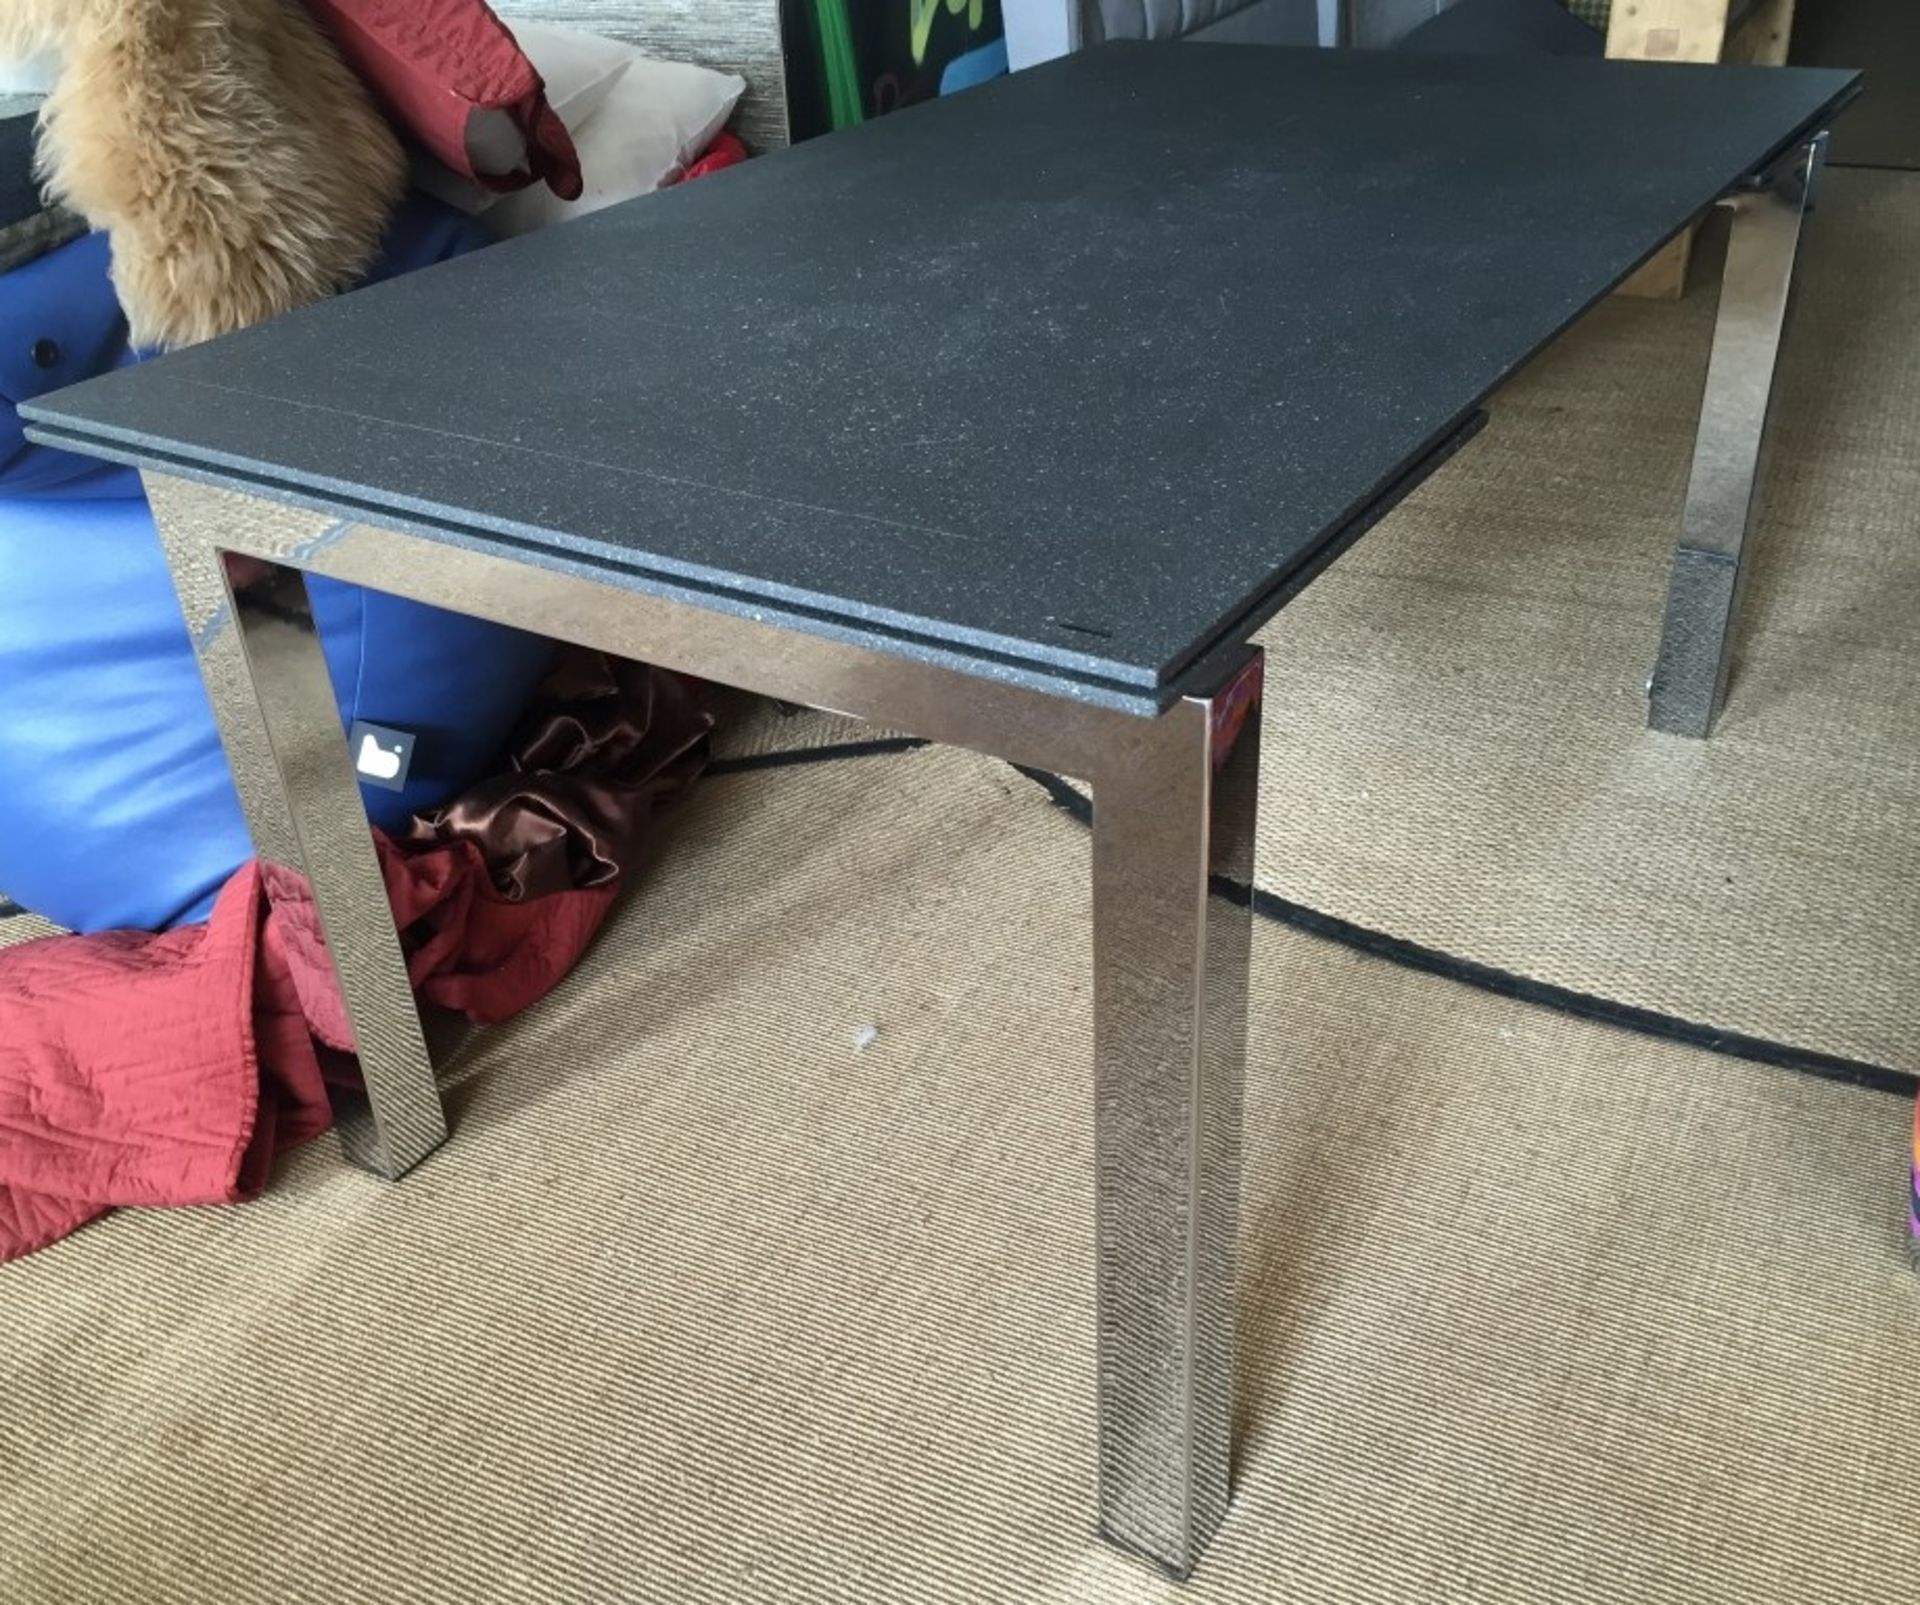 1 x Designer Granite Effect Extending Table - Easily Adjustable, With A sturdy Metal Frame With An - Image 3 of 7